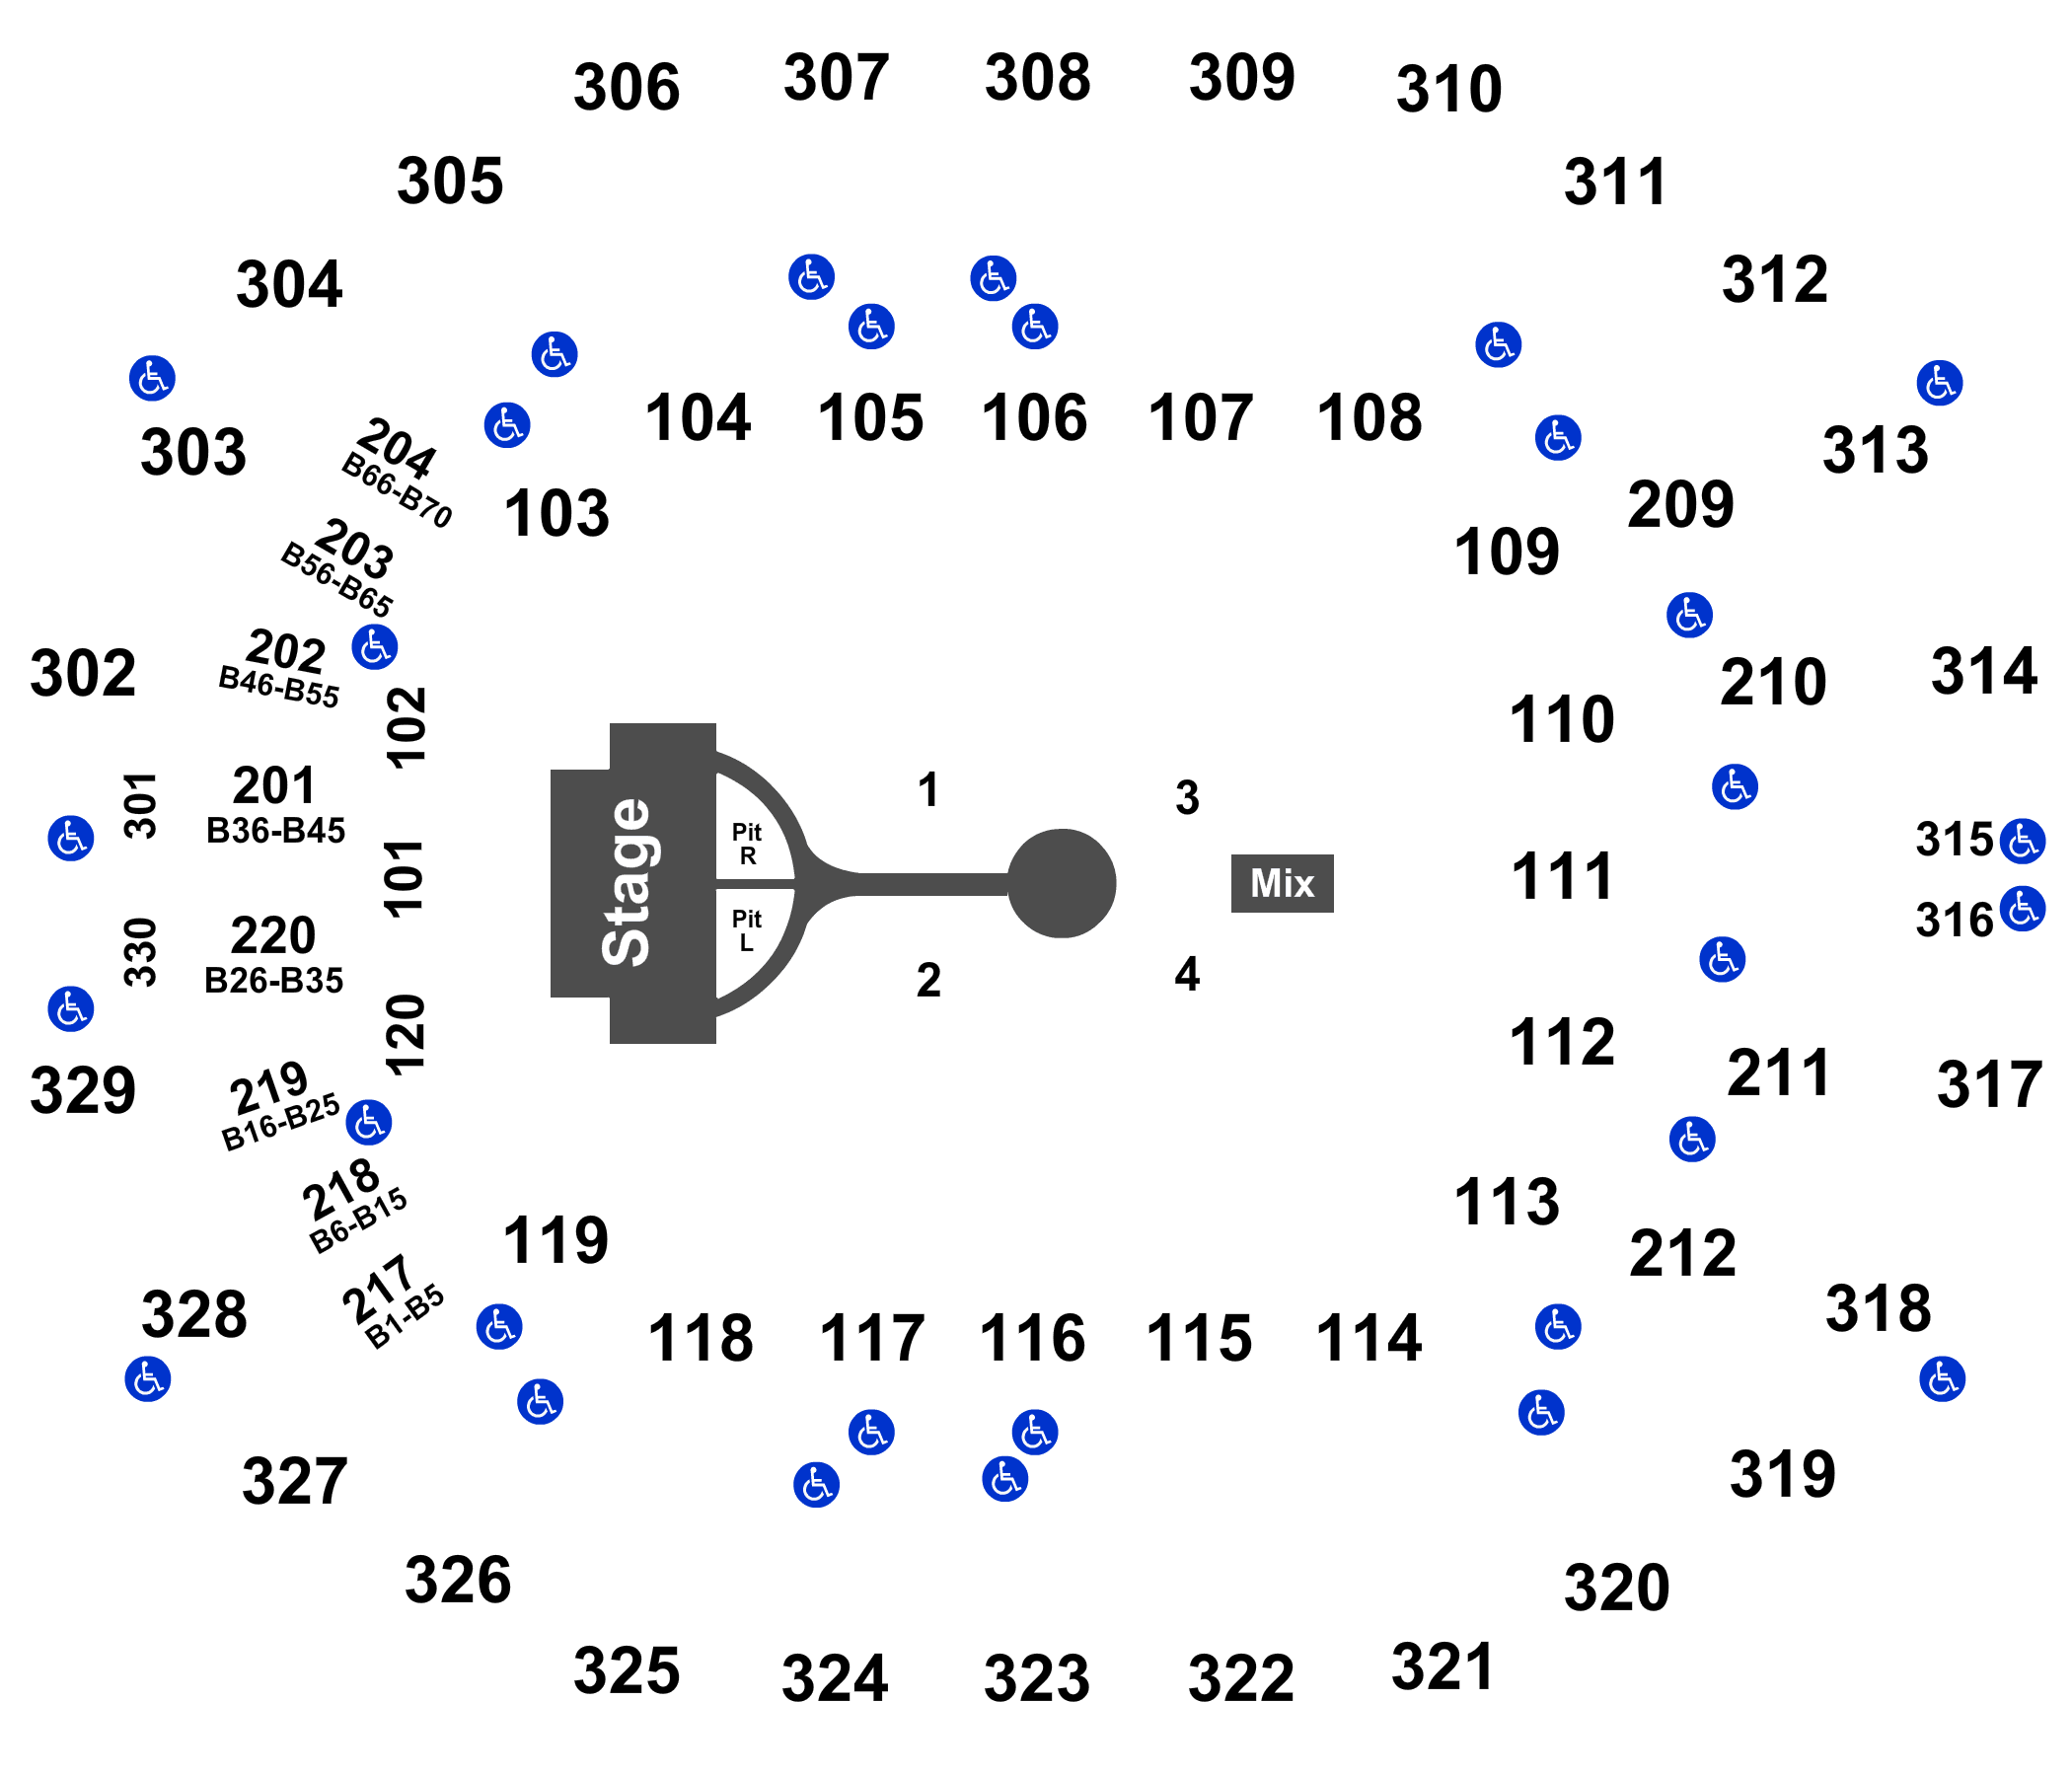 Yum Center Louisville Ky Seating Chart